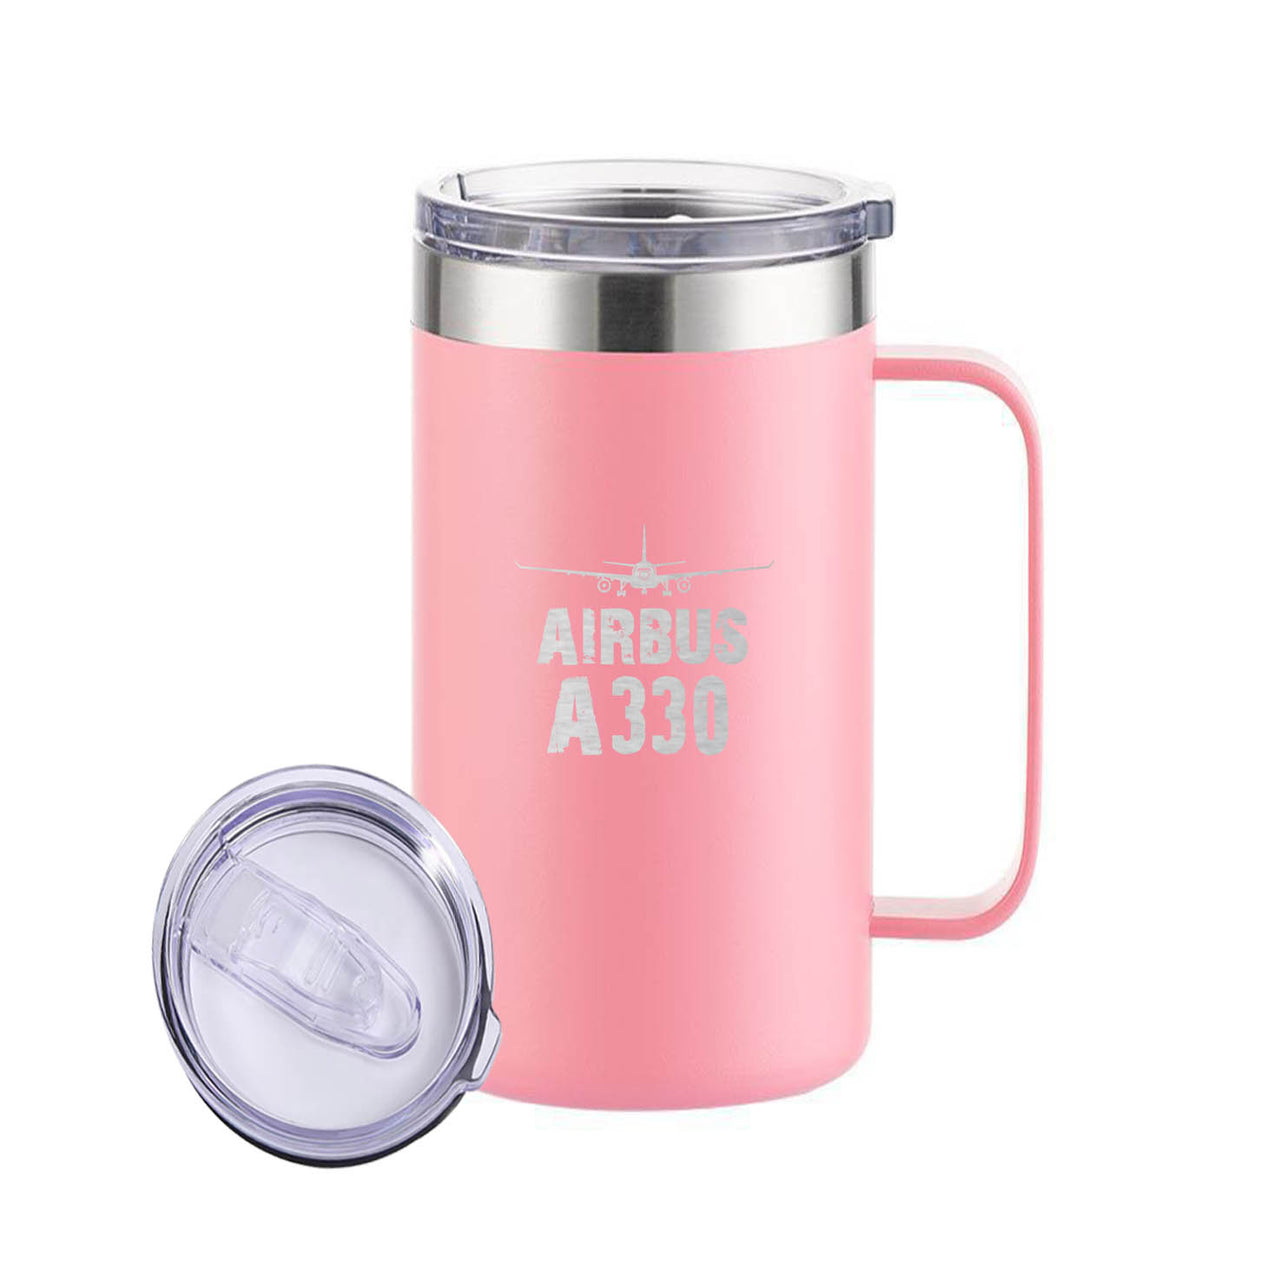 Airbus A330 & Plane Designed Stainless Steel Beer Mugs